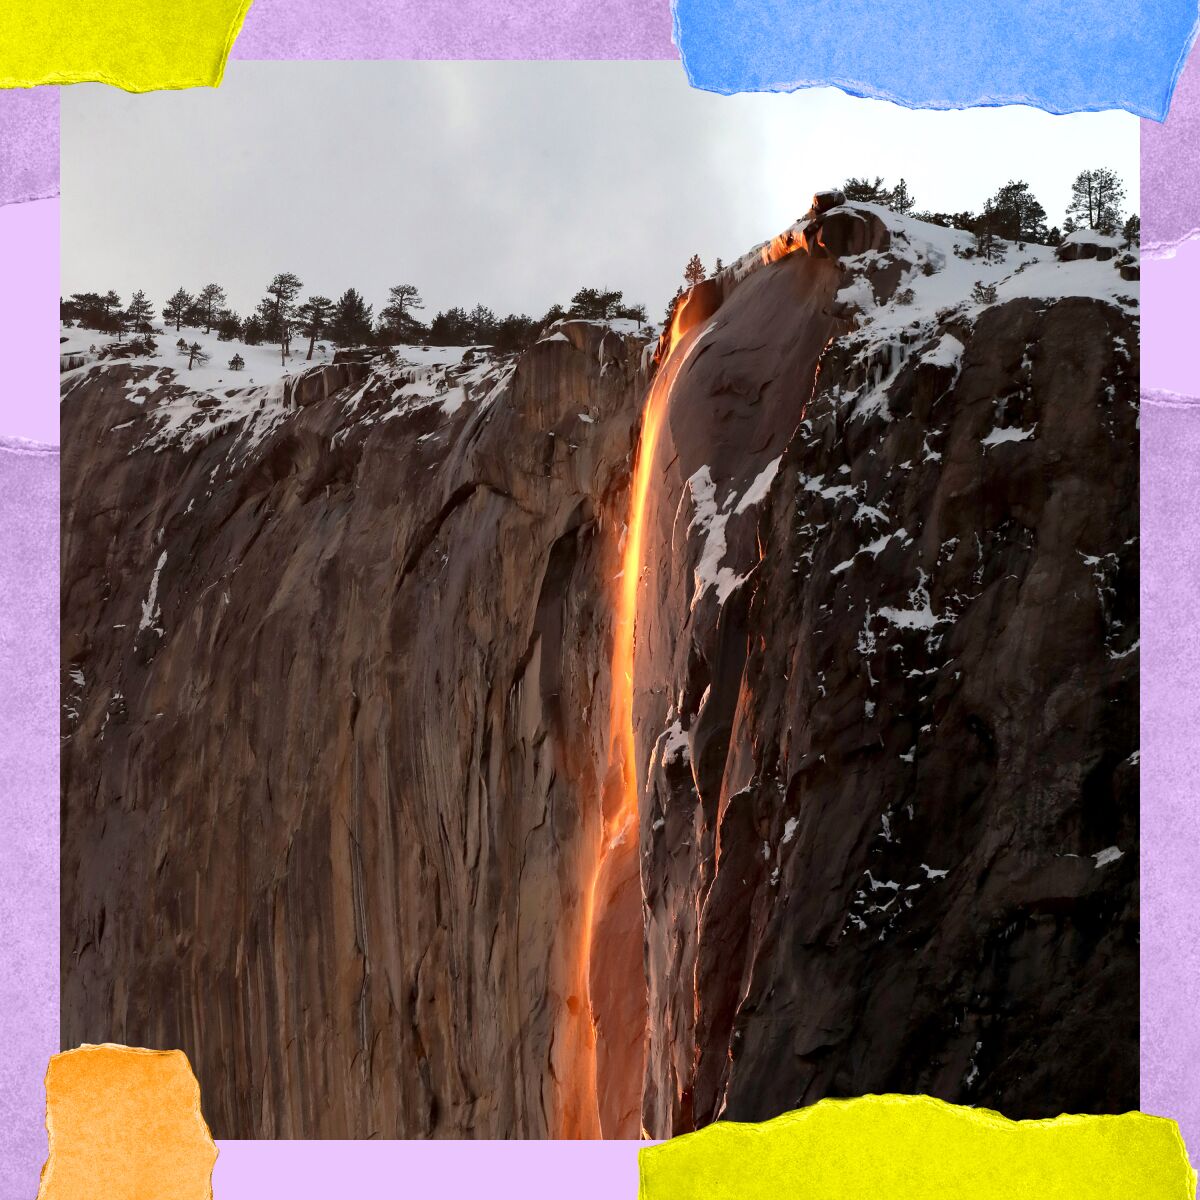 Horsetail Fall looks like a fiery waterfall due to the “firefall” effect.